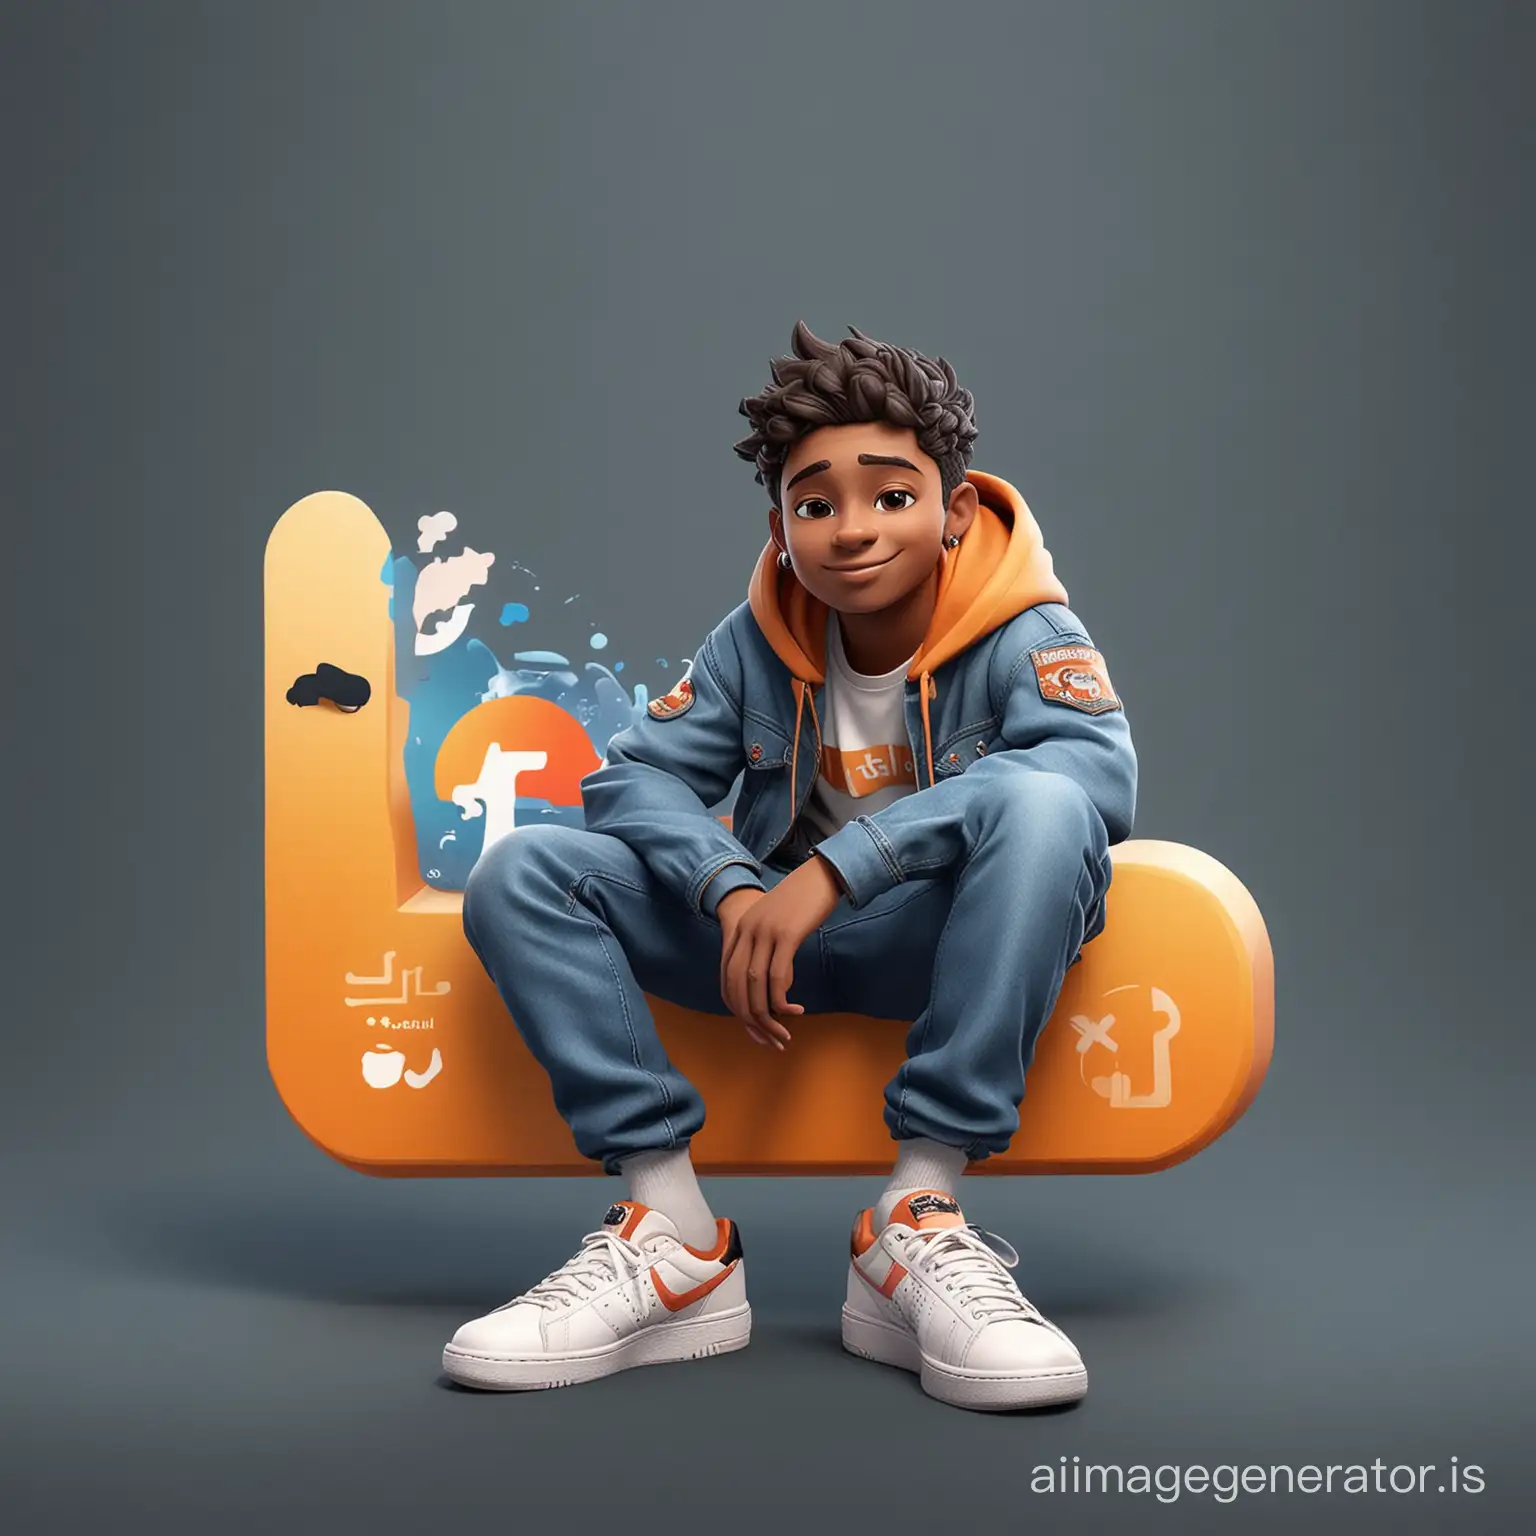 Create a 3D illustration of an animated character sitting casually on top of a social media logo "X". The character must wear casual modern clothing such as jeans jacket and sneakers shoes. The background of the image is a social media profile page with a user name "Muhammad Bilal" and a profile picture that match.